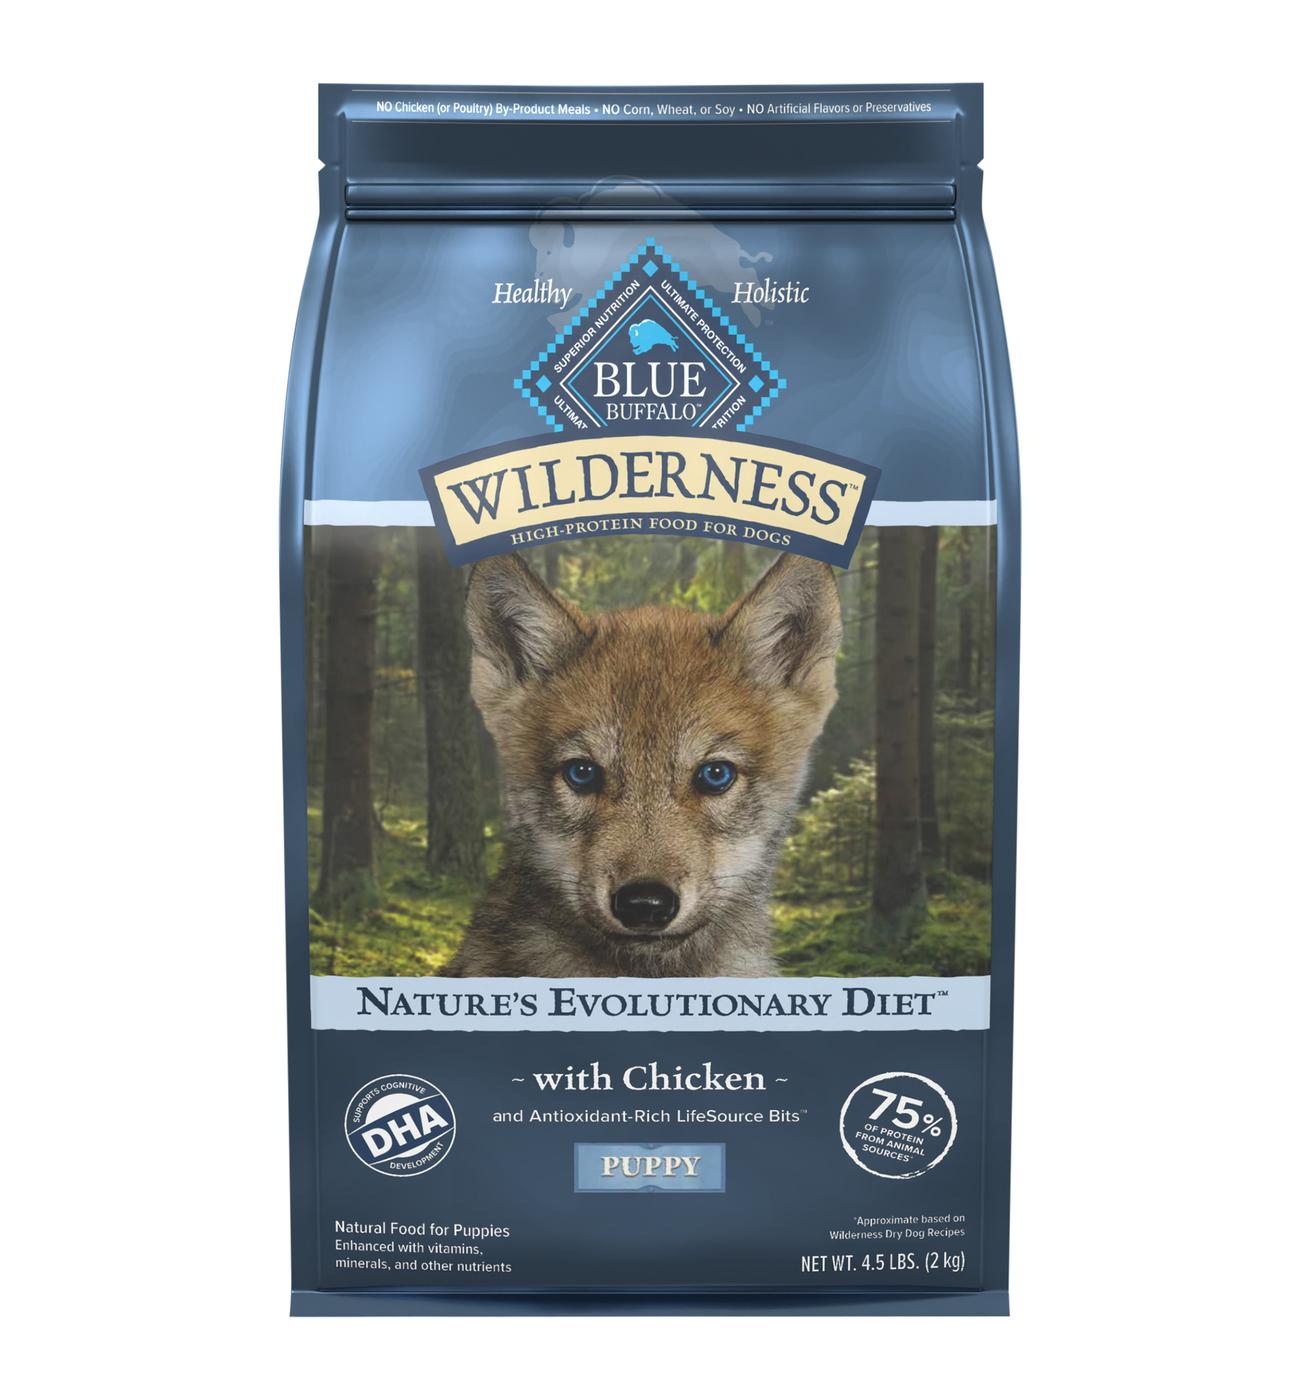 Blue Buffalo Wilderness Chicken & LifeSource Bits Dry Puppy Food; image 1 of 2